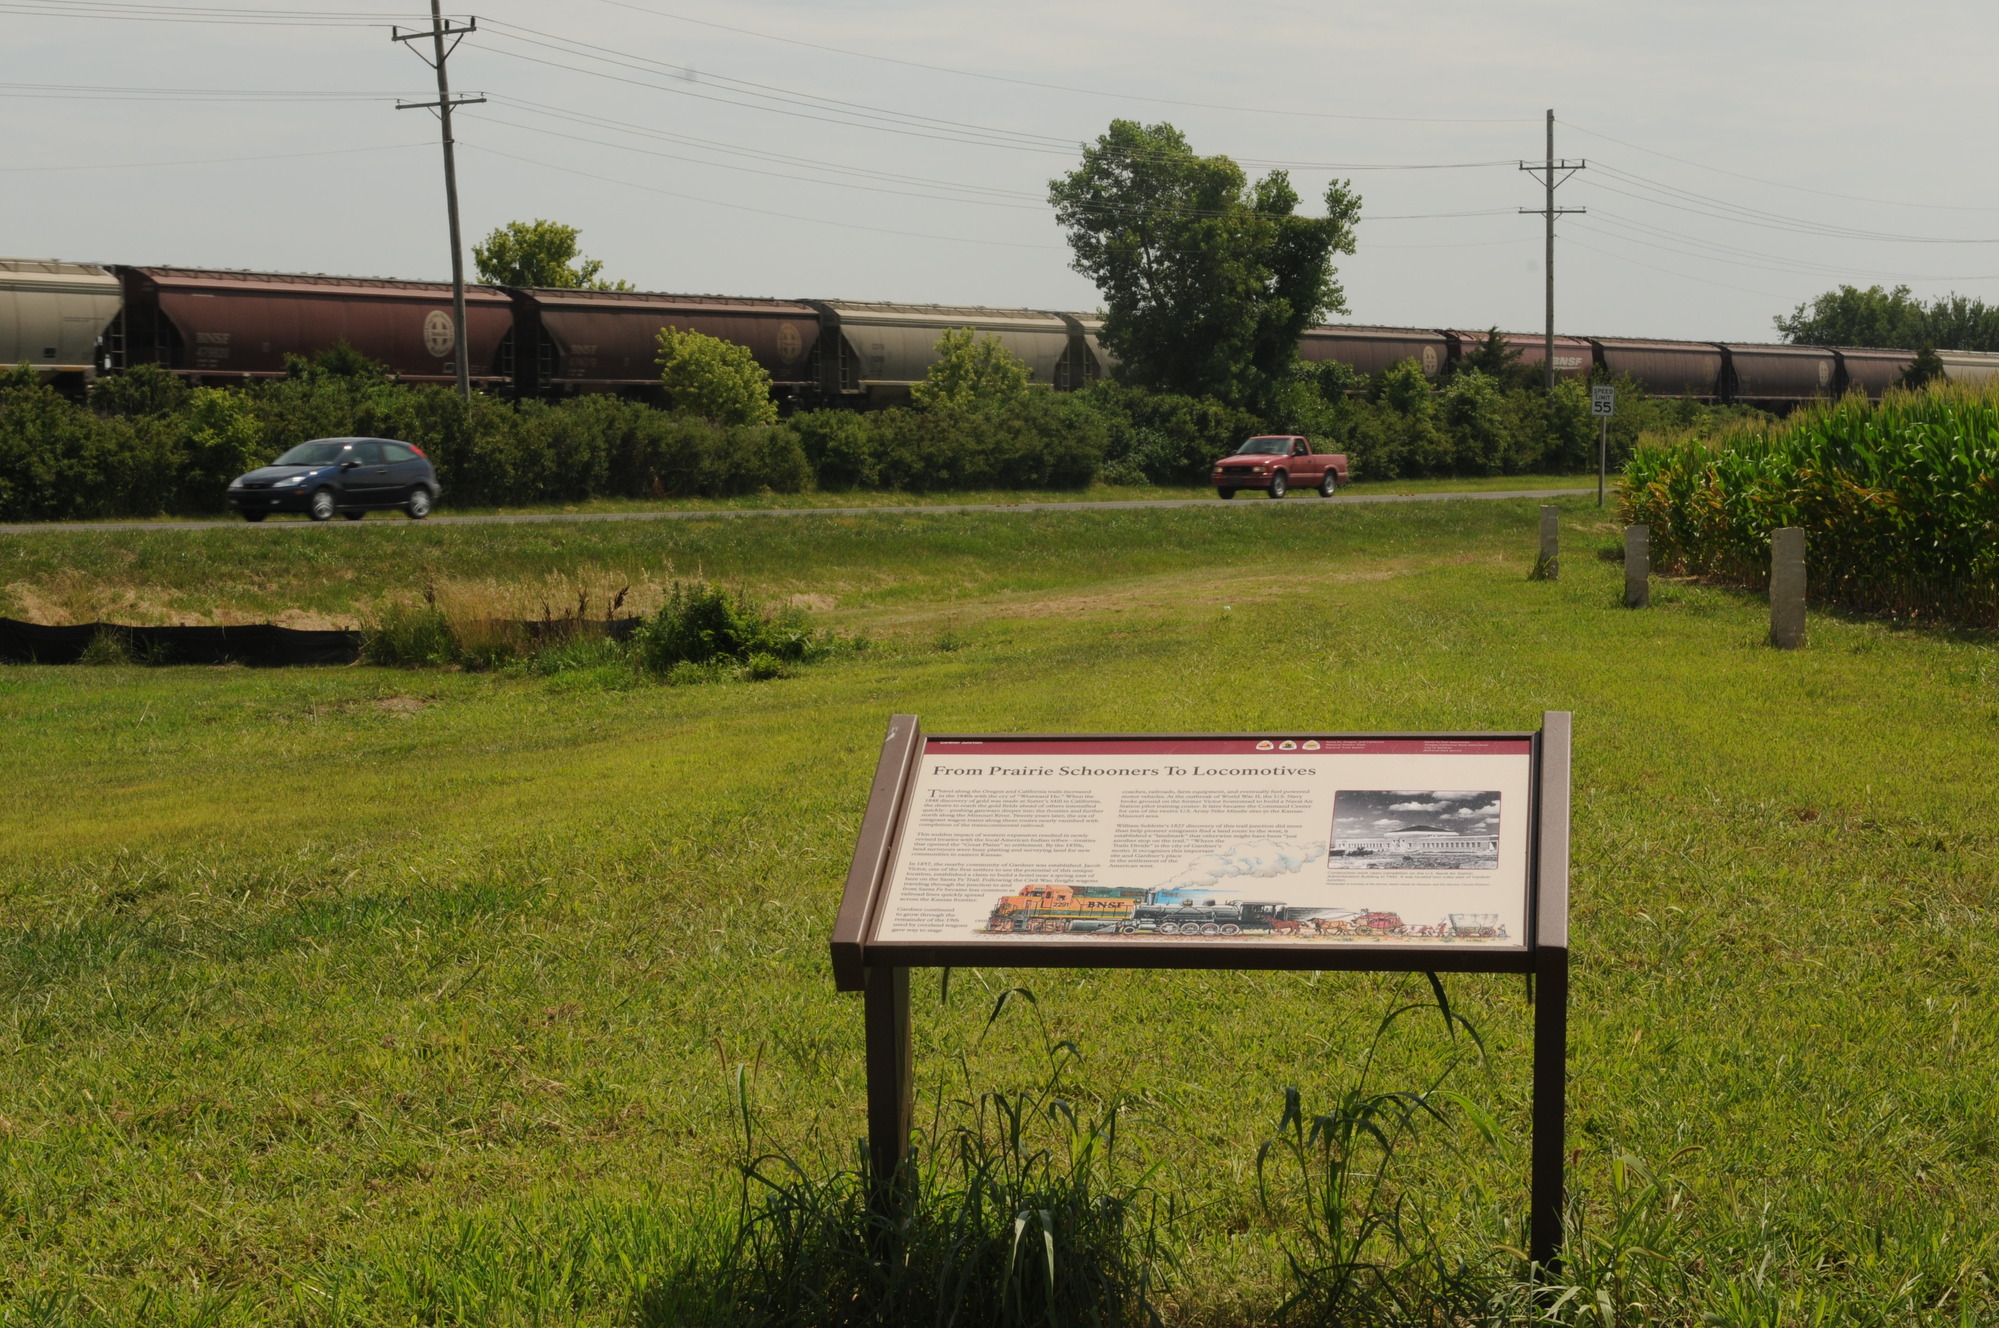 "From Prairie Schooners to Locomotives" wayside with train and cars in the background at Gardner Junction